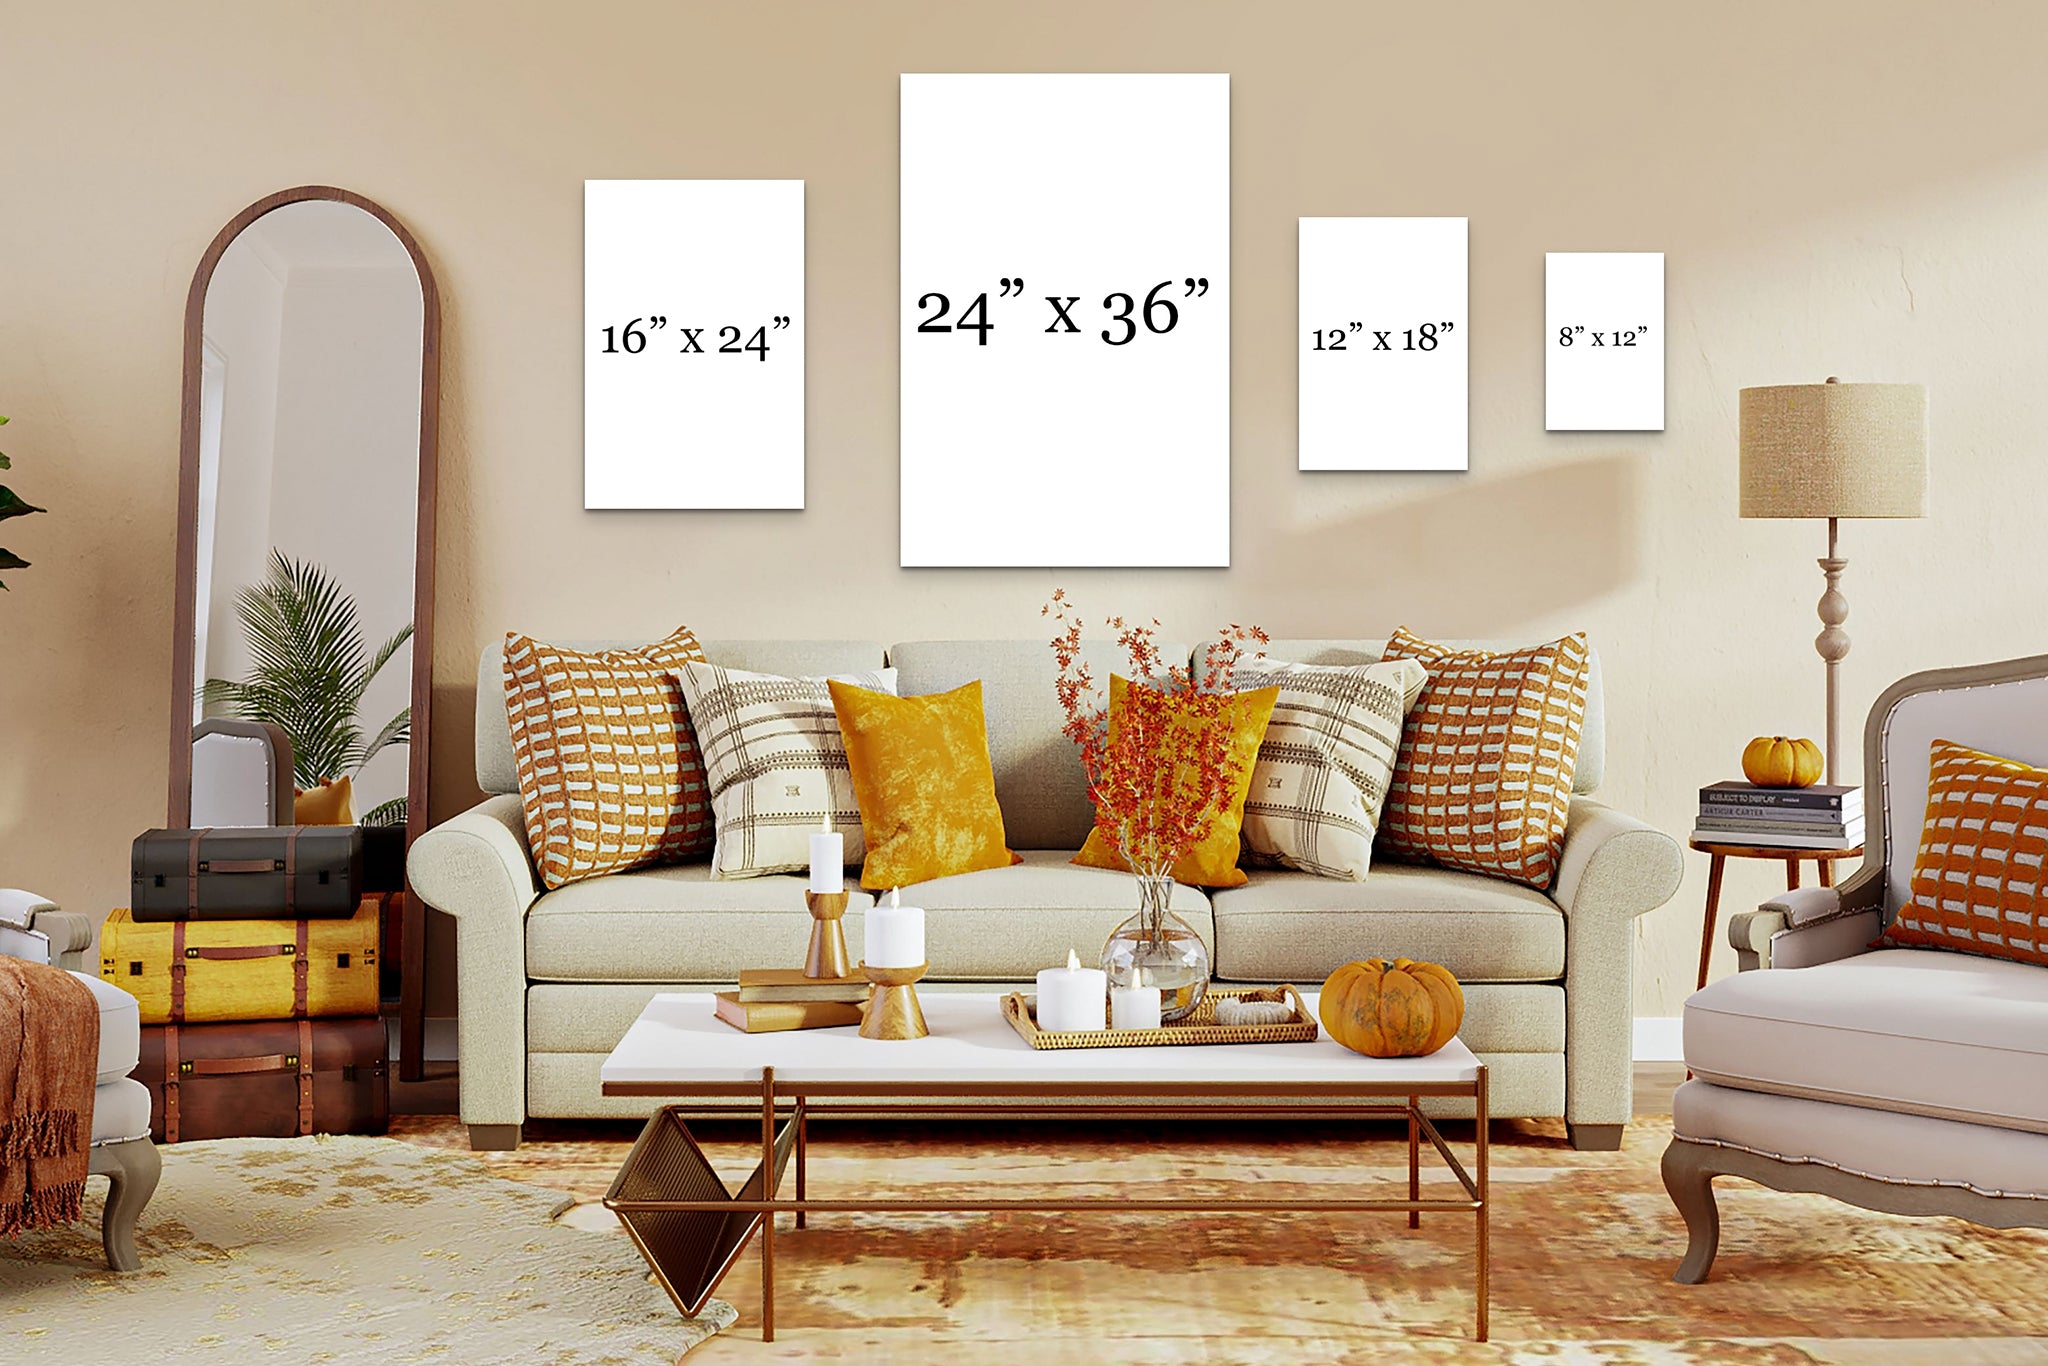 Picture of living room with various size white pictures hanging on the wall. The pictures have numbers written on them, showing the size of the artwork on the wall. The picture is to act as a size guide. 